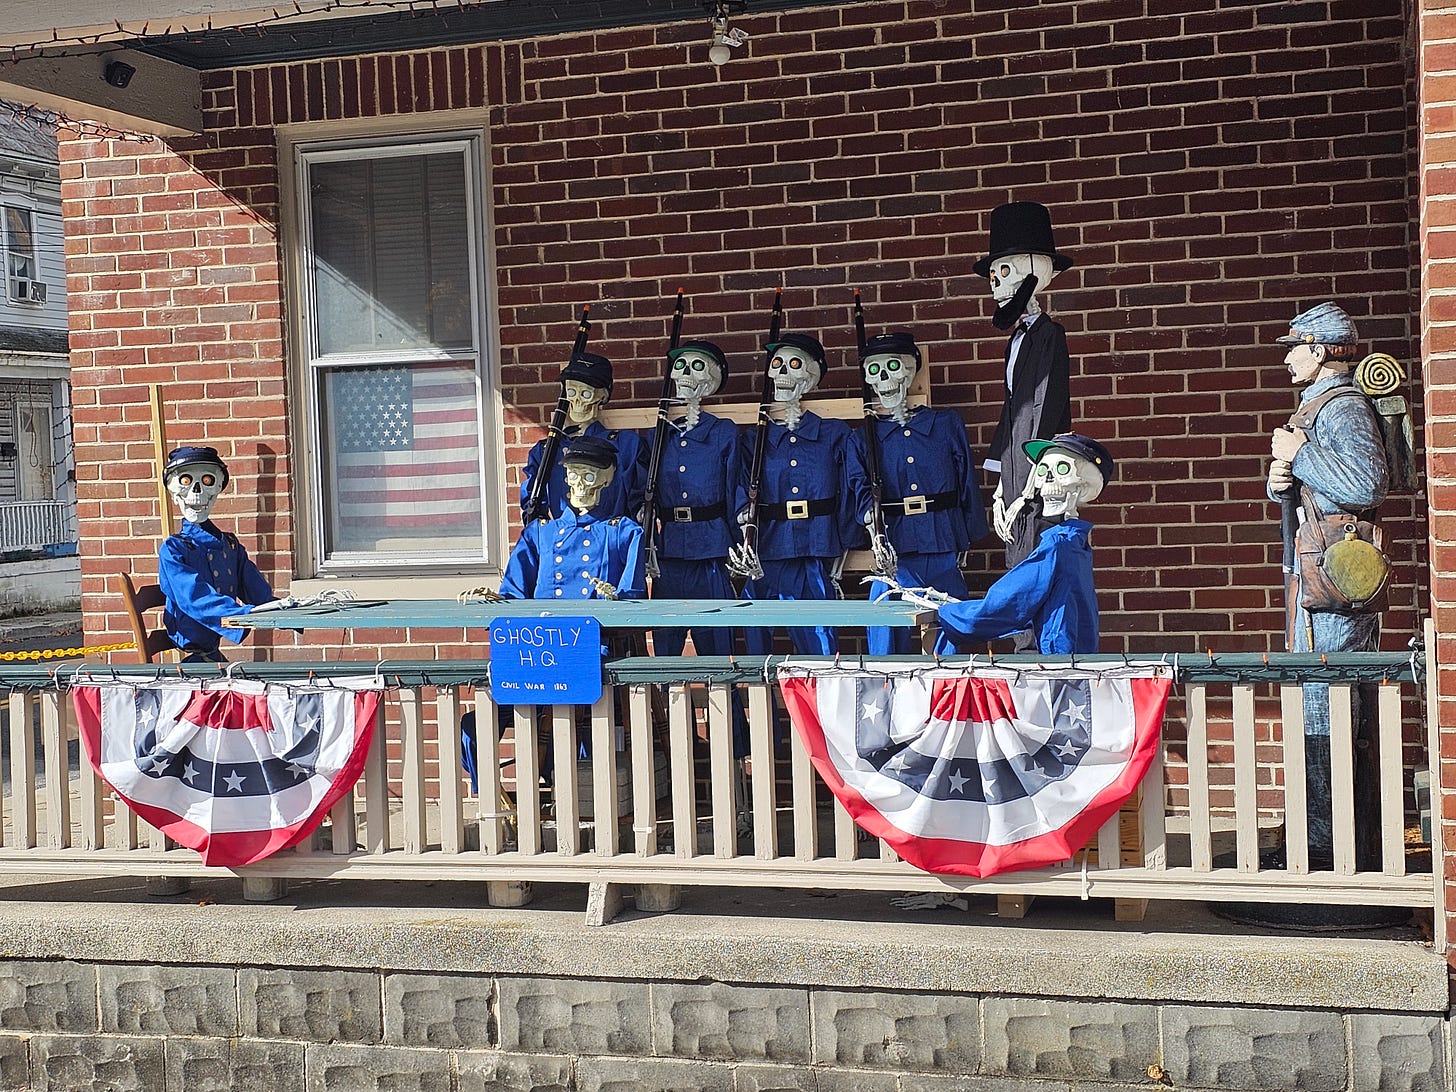 Table full of skeletons dressed in blue from the Civil War.